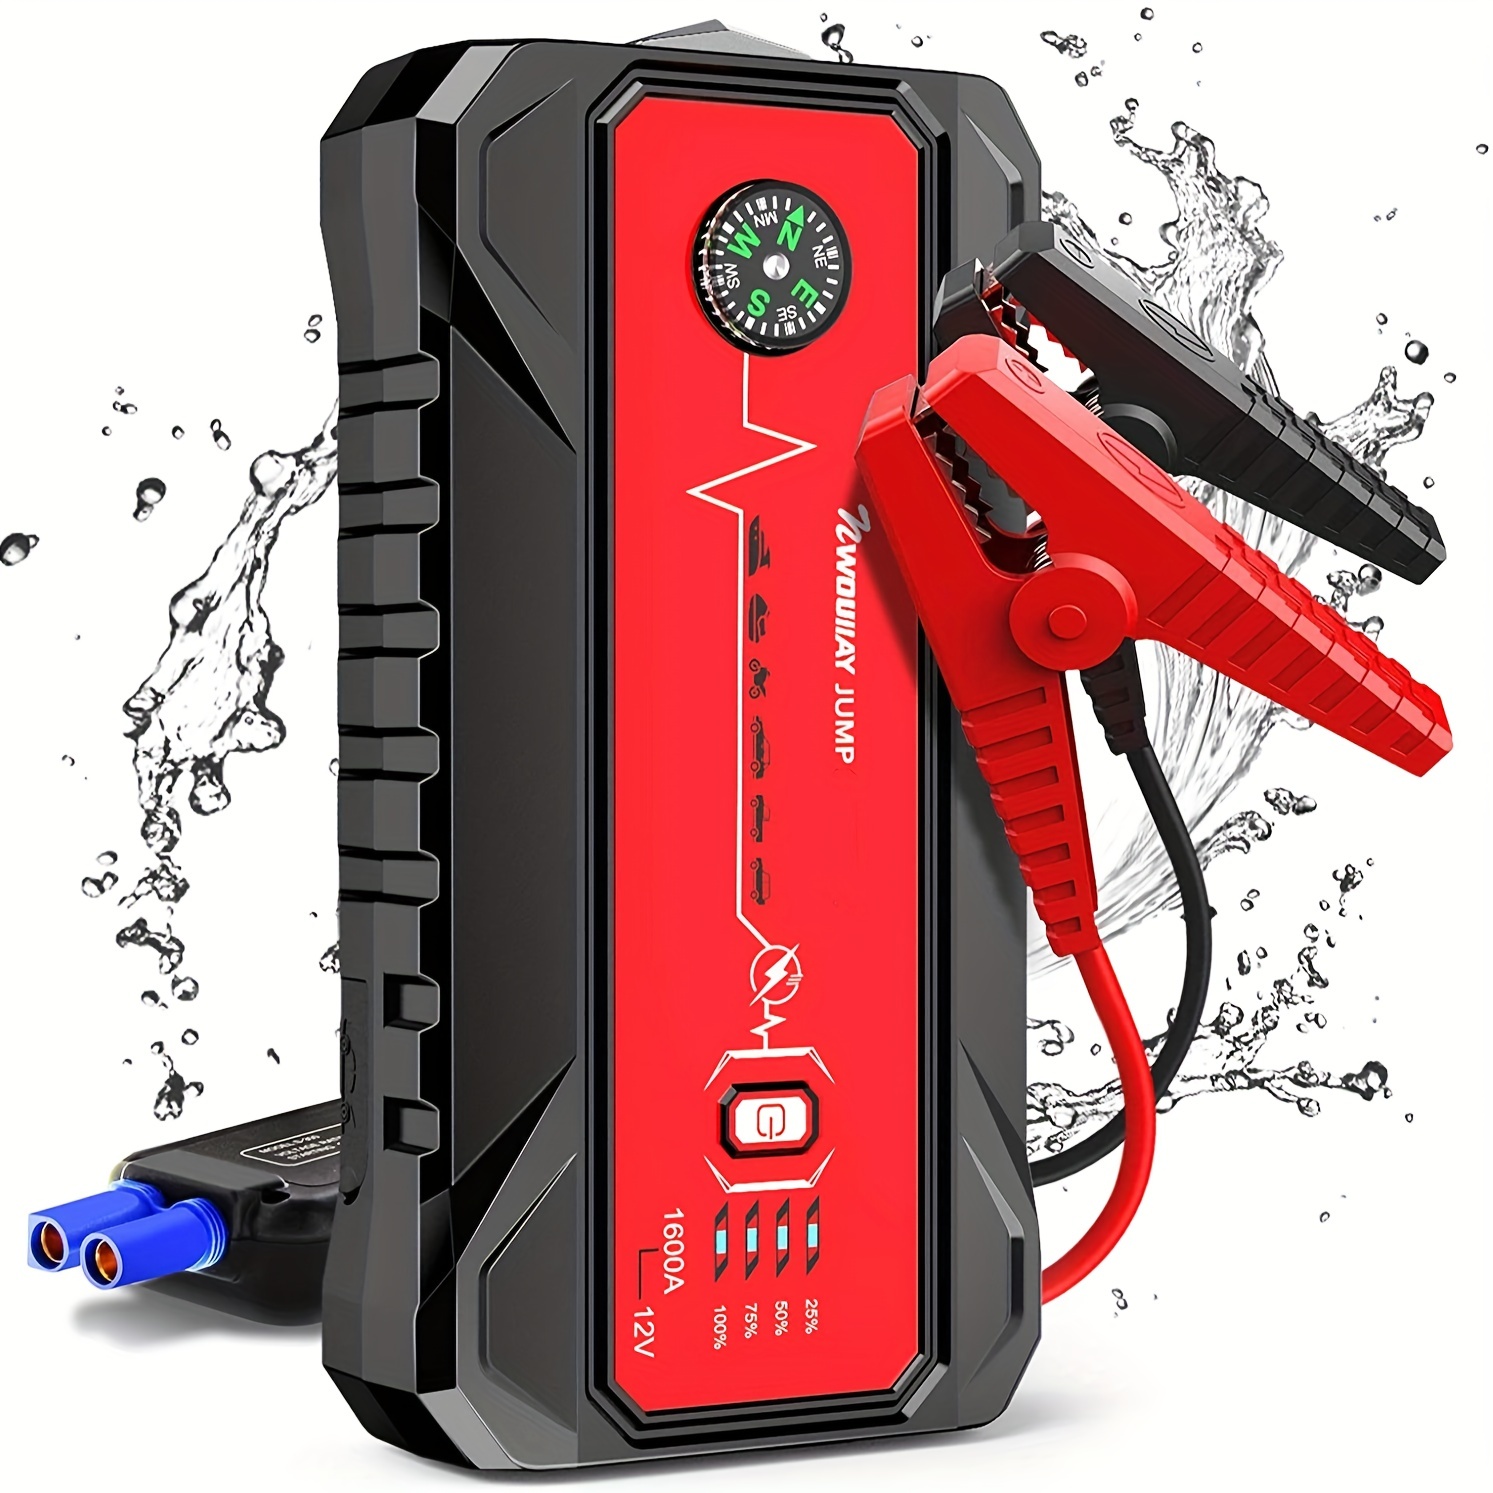 

Car Emergency Starting Power Supplycar Battery Charger